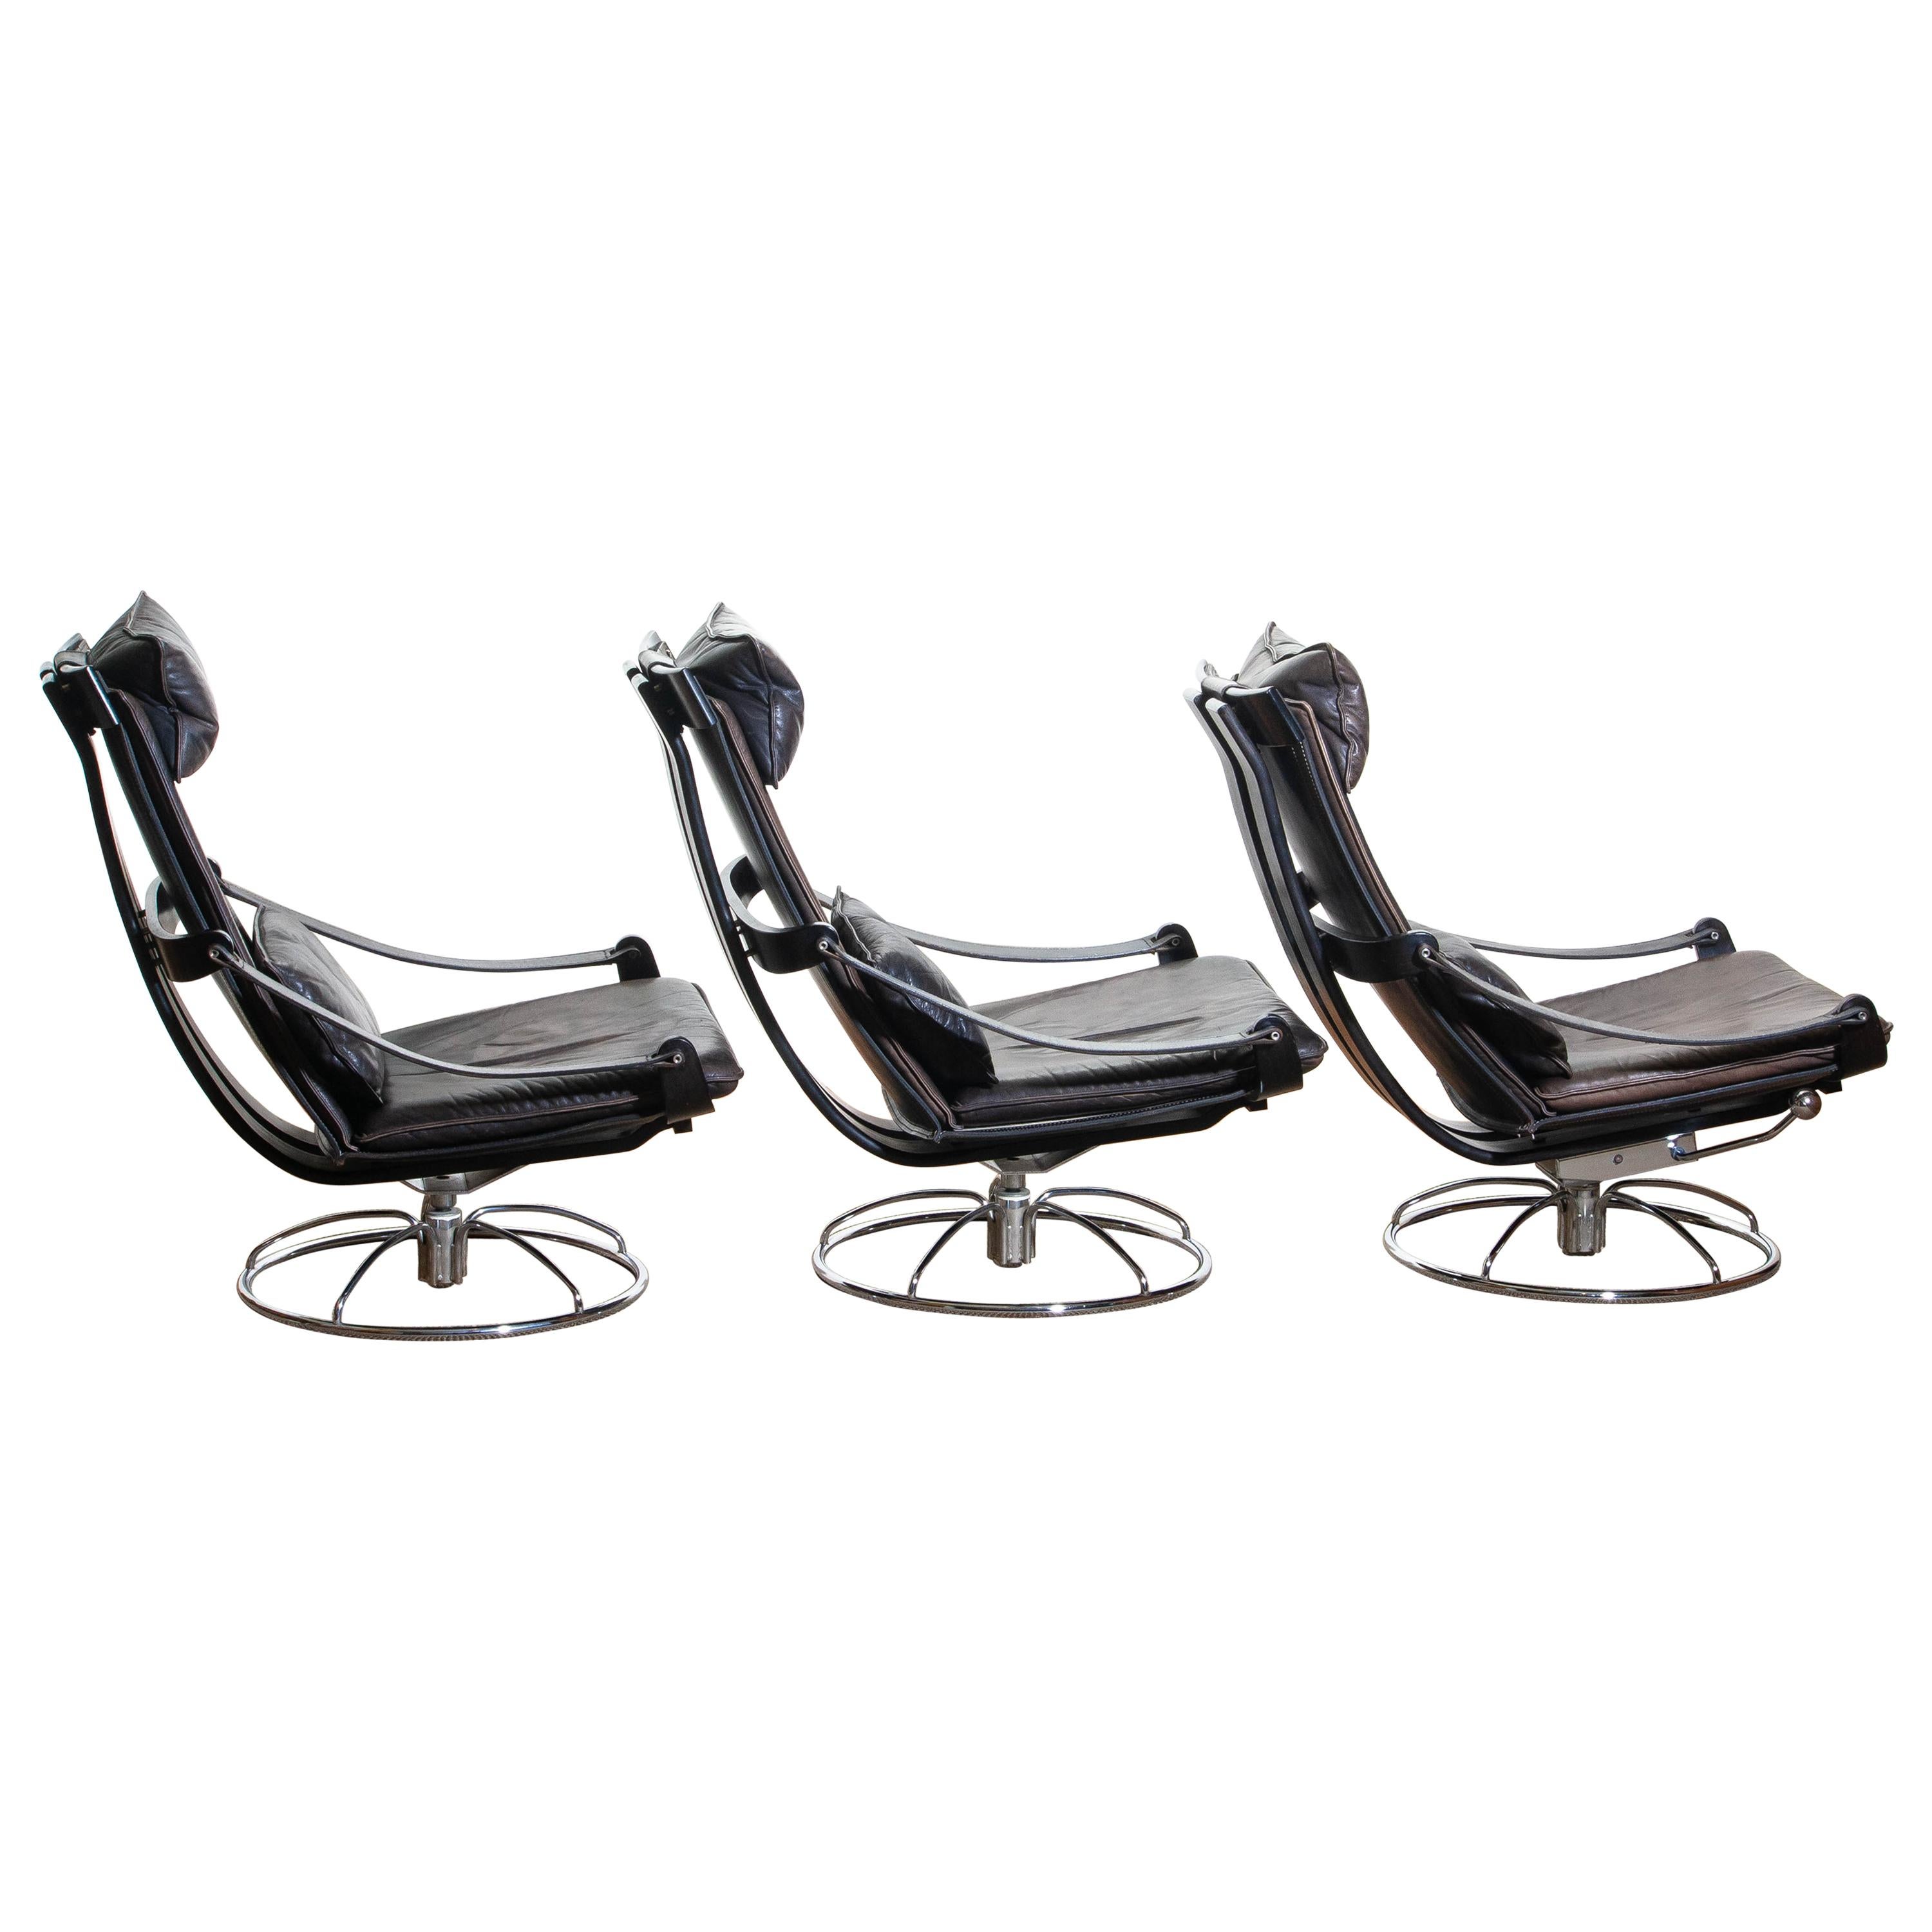 Scandinavian Modern 1970s, Three Leather Swivel / Relax Chairs by Ake Fribytter for Nelo, Sweden